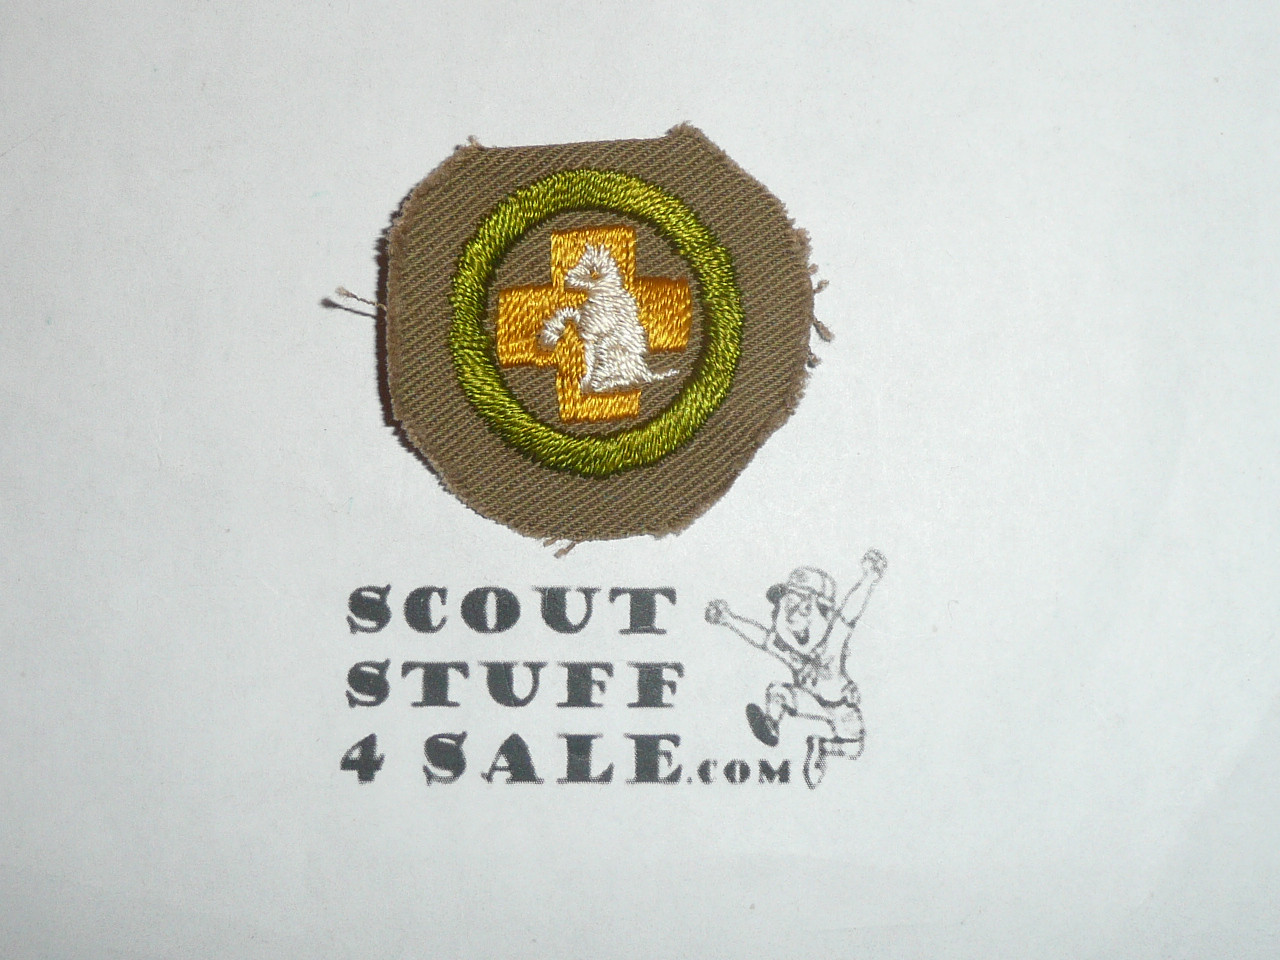 First Aid to Animals - Type A - Square Tan Merit Badge (1911-1933), Material trimmed not used